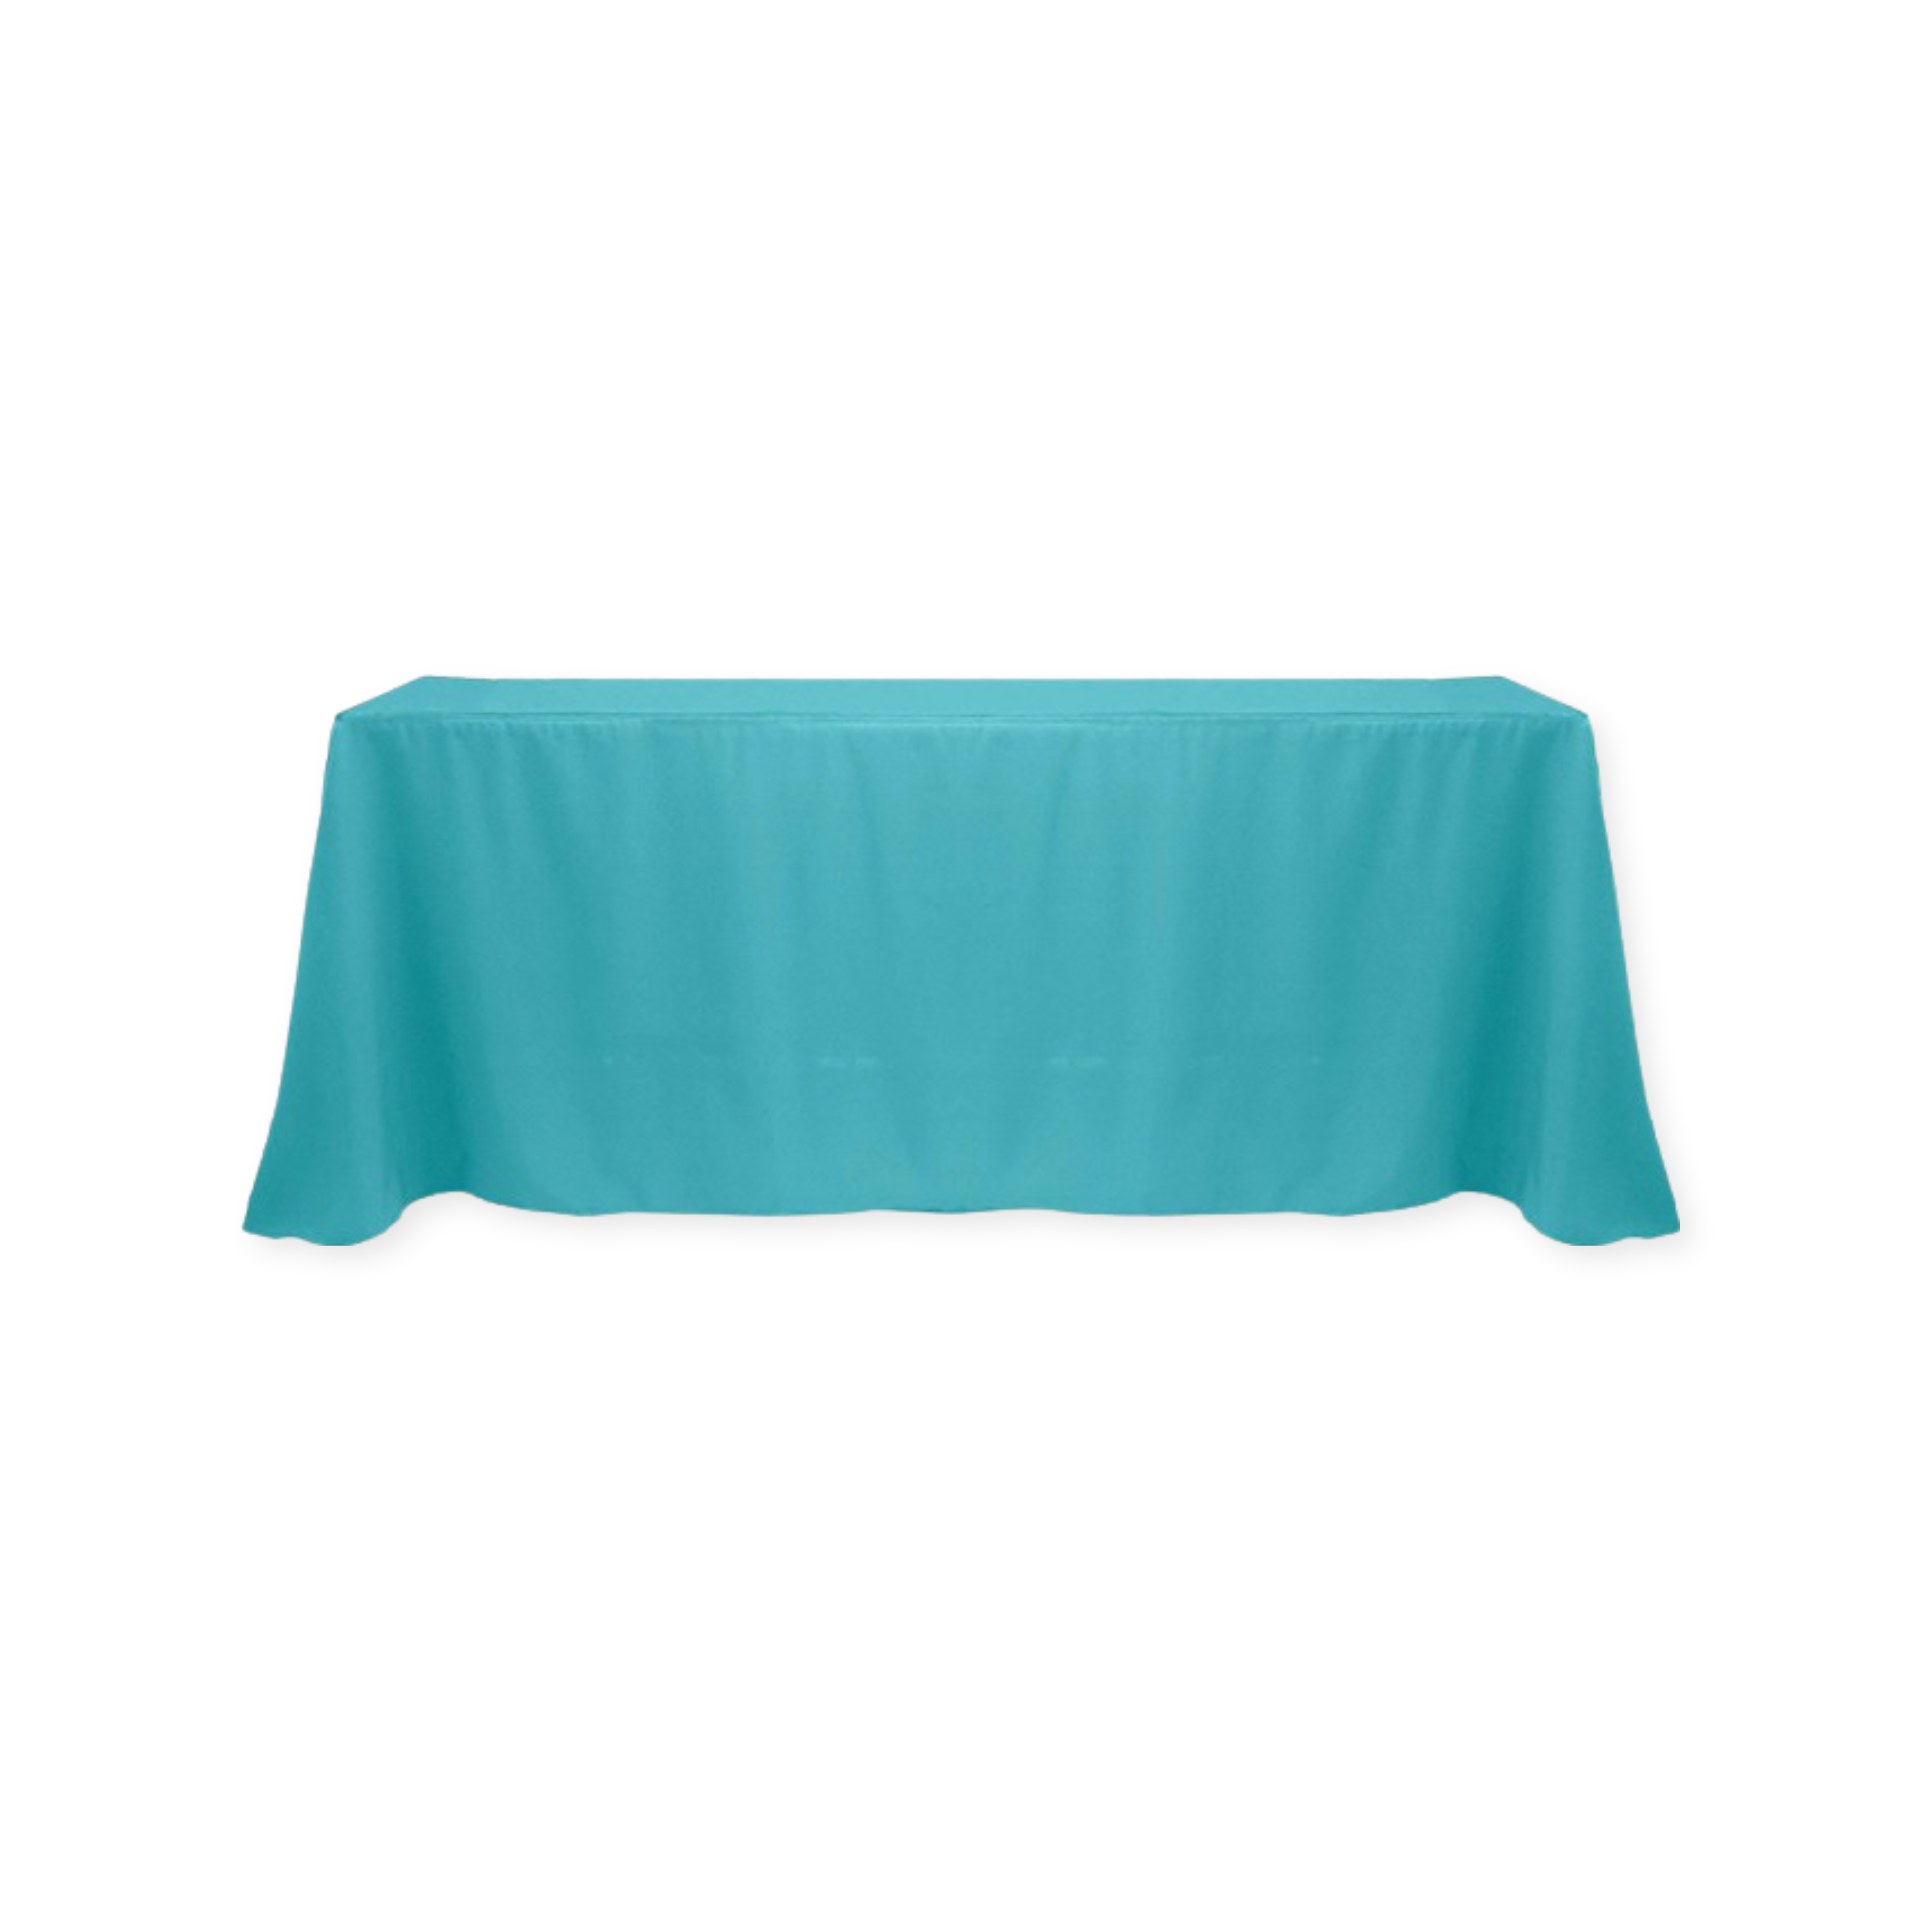 Tablecloth polyester rectangle mary blue commercial grade wedding party event rental panama city beach